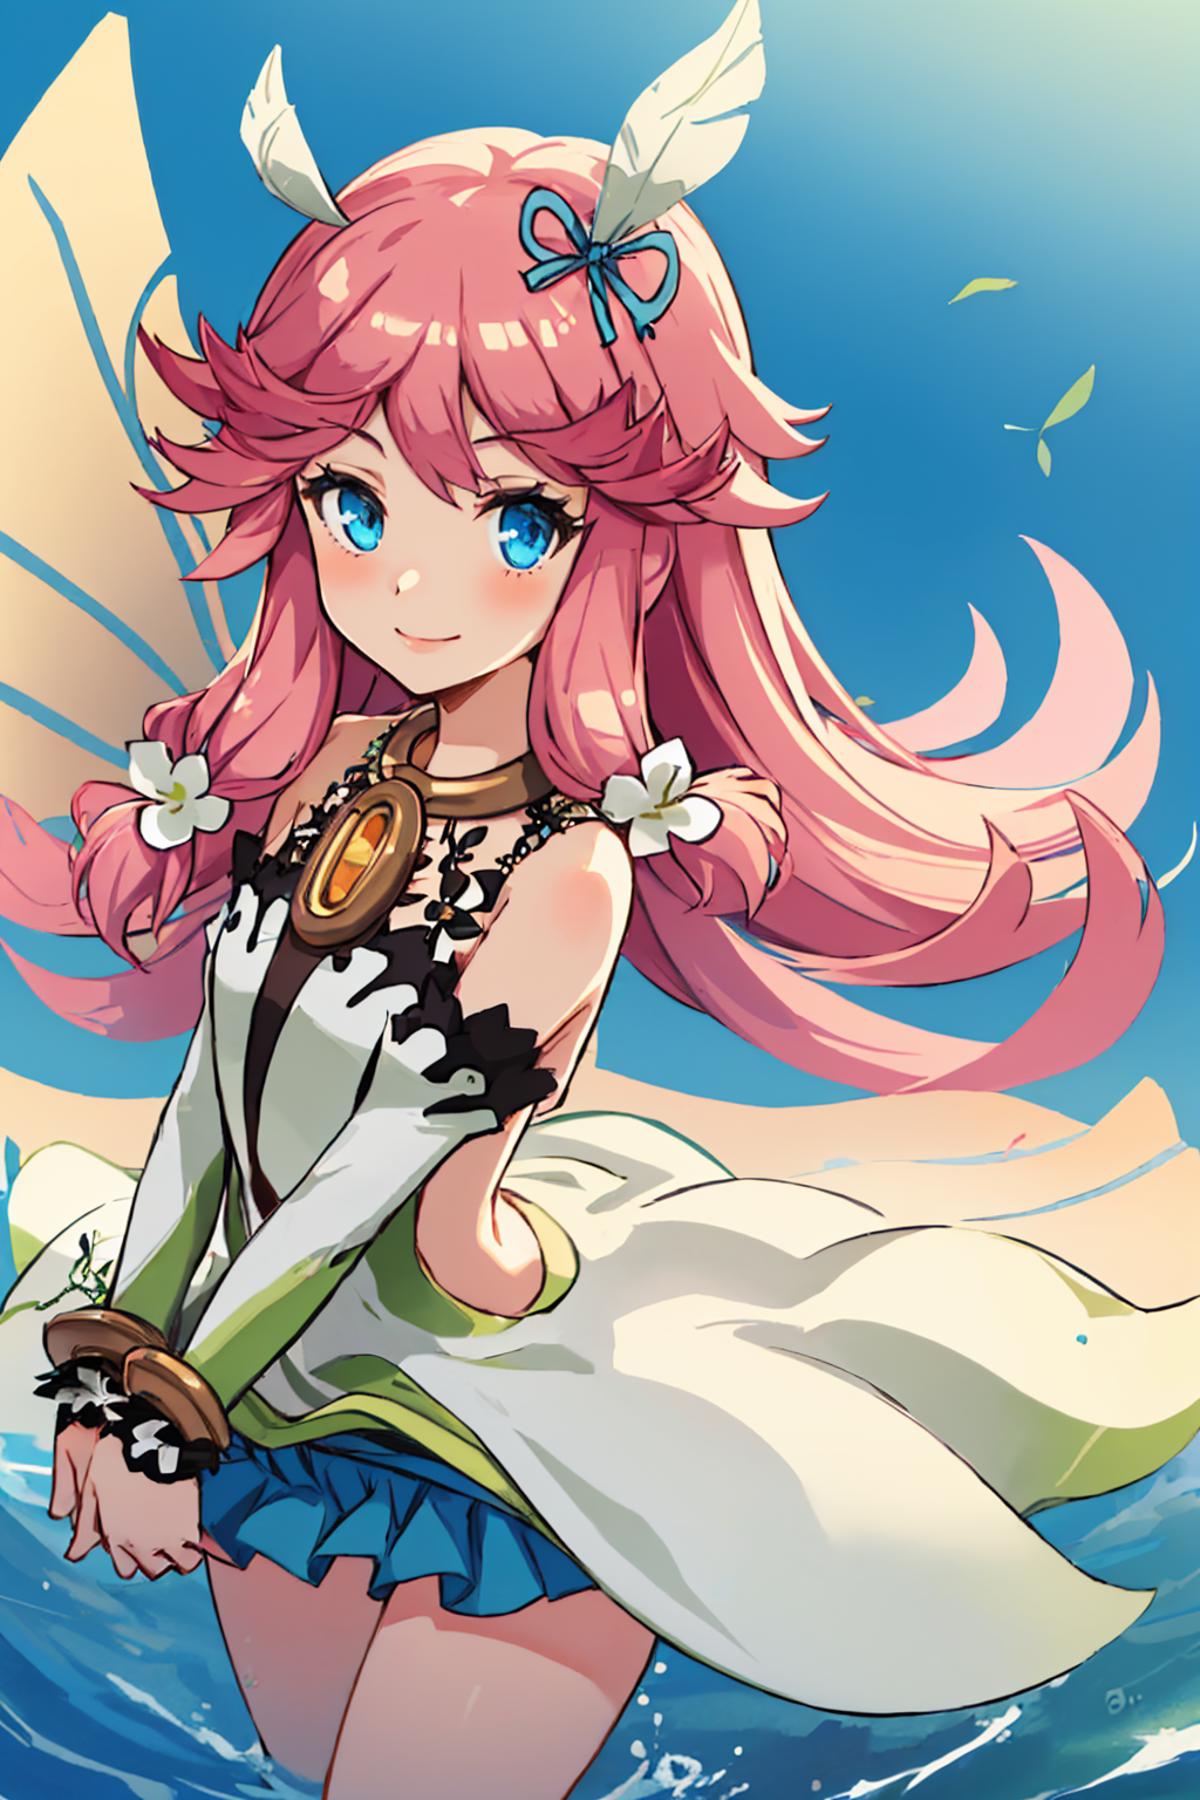 Notte | Dragalia Lost image by justTNP